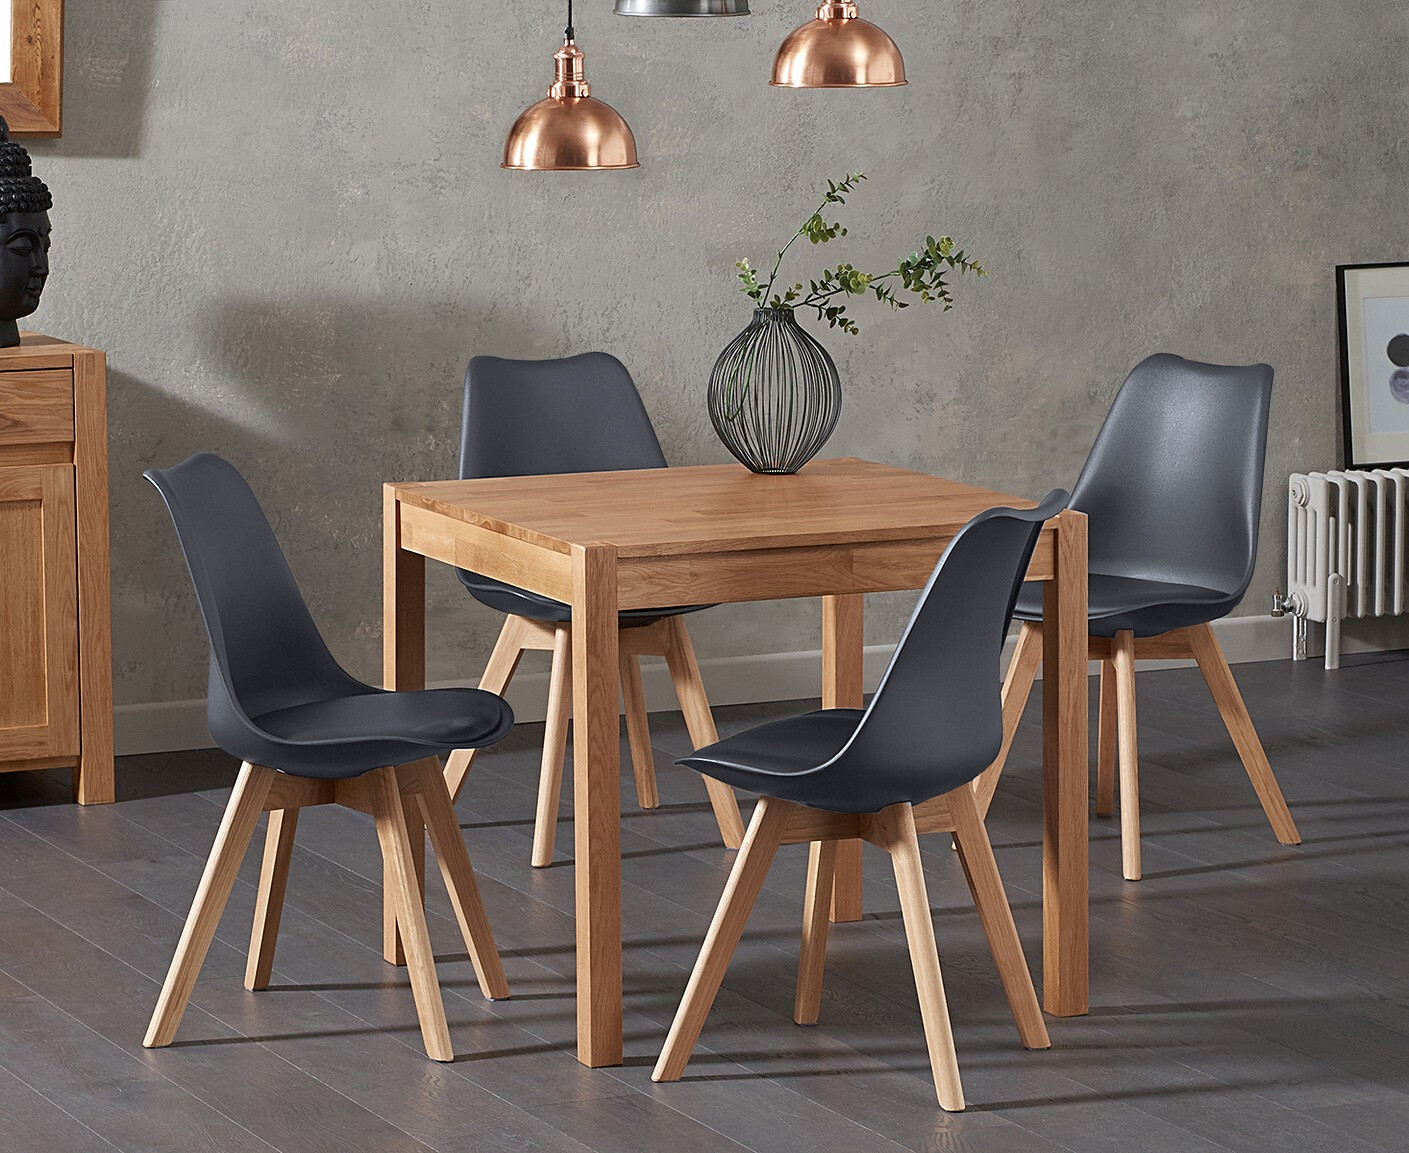 Photo 1 of York 80cm solid oak dining table with 2 dark grey orson chairs